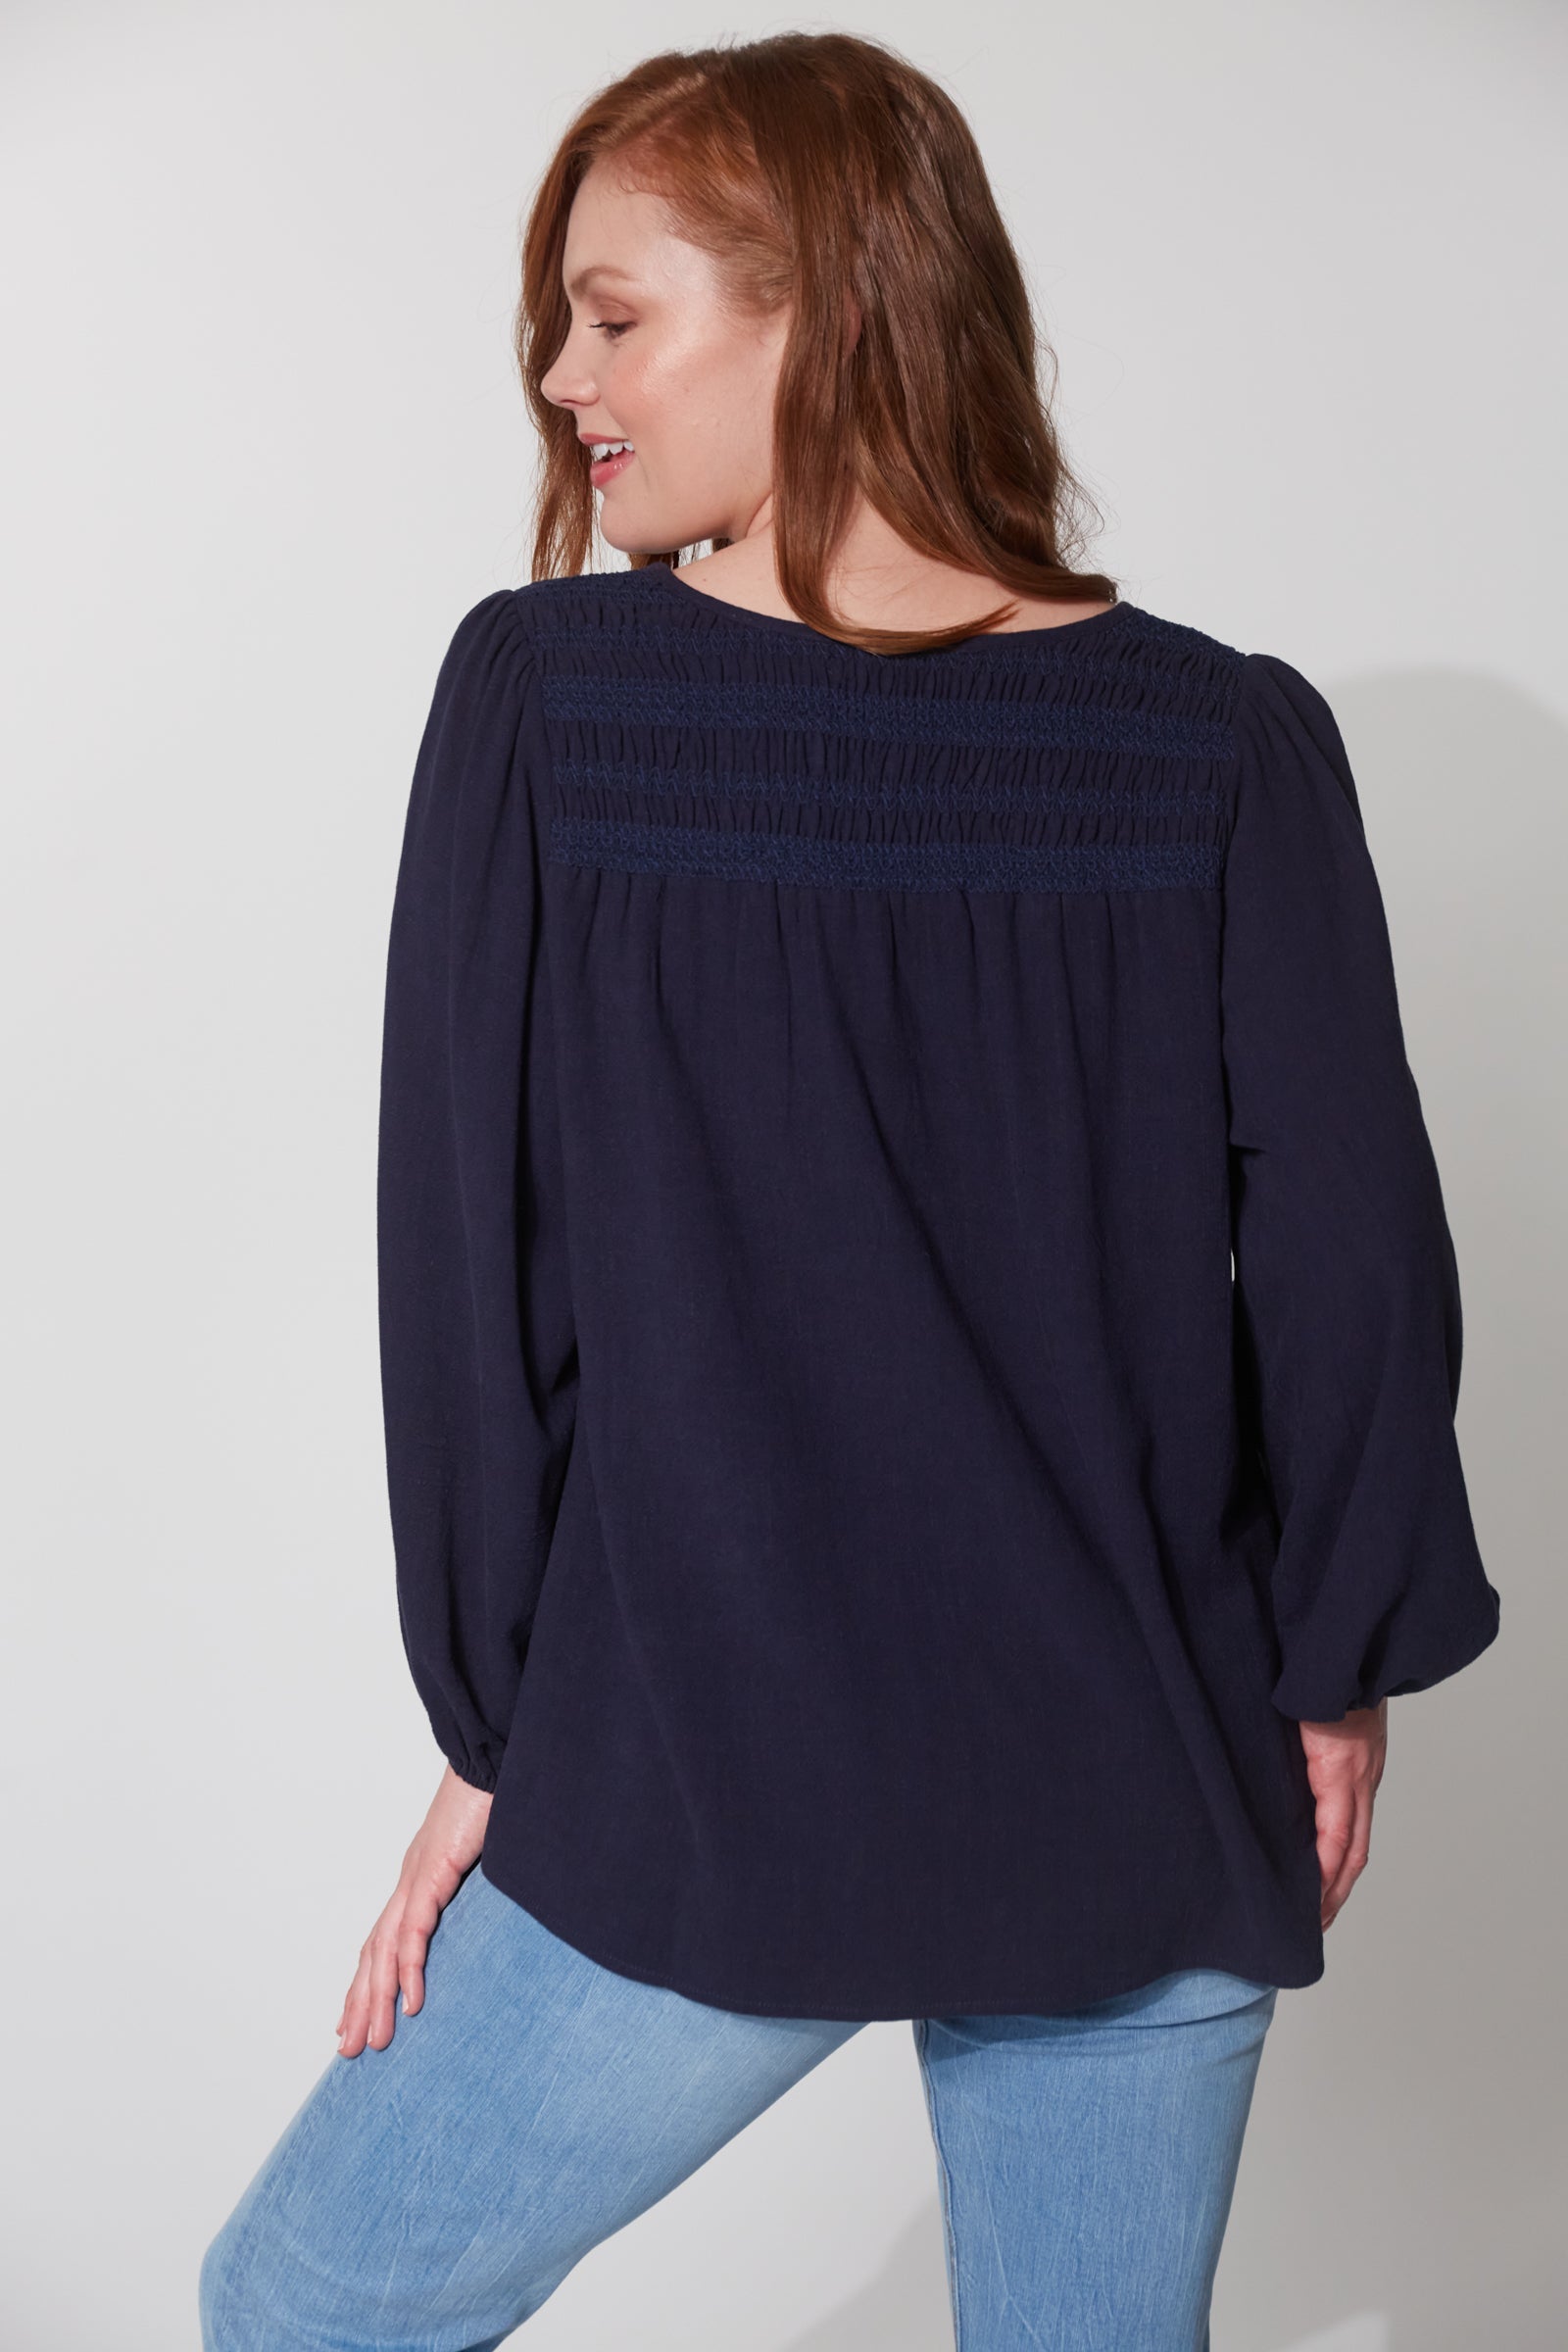 Lauder Blouse - Midnight-Tops-Haven-The Bay Room